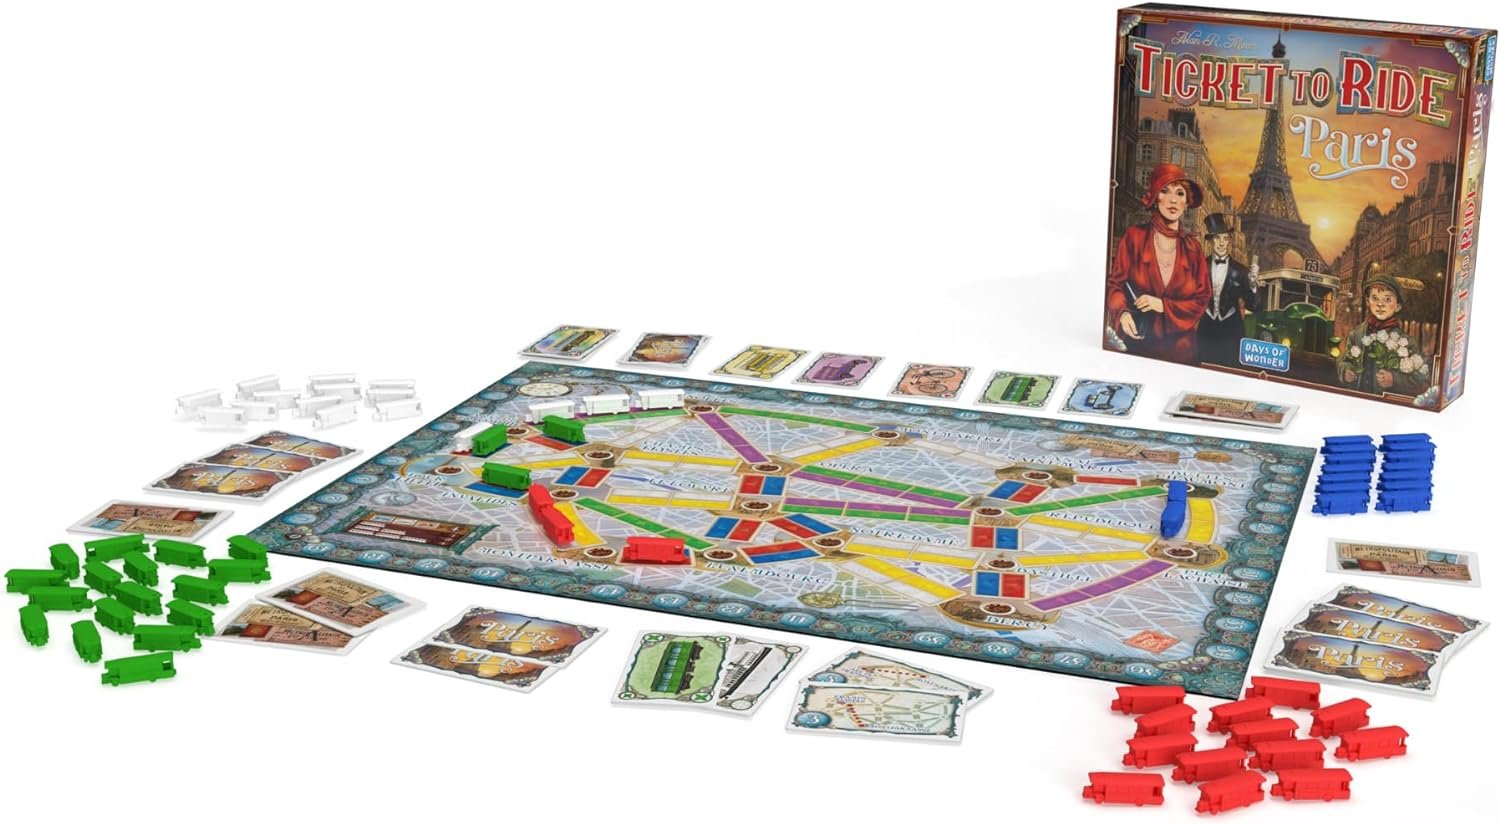 Ticket to Ride Paris: Explore 1920s Paris in the Latest Board Game Release